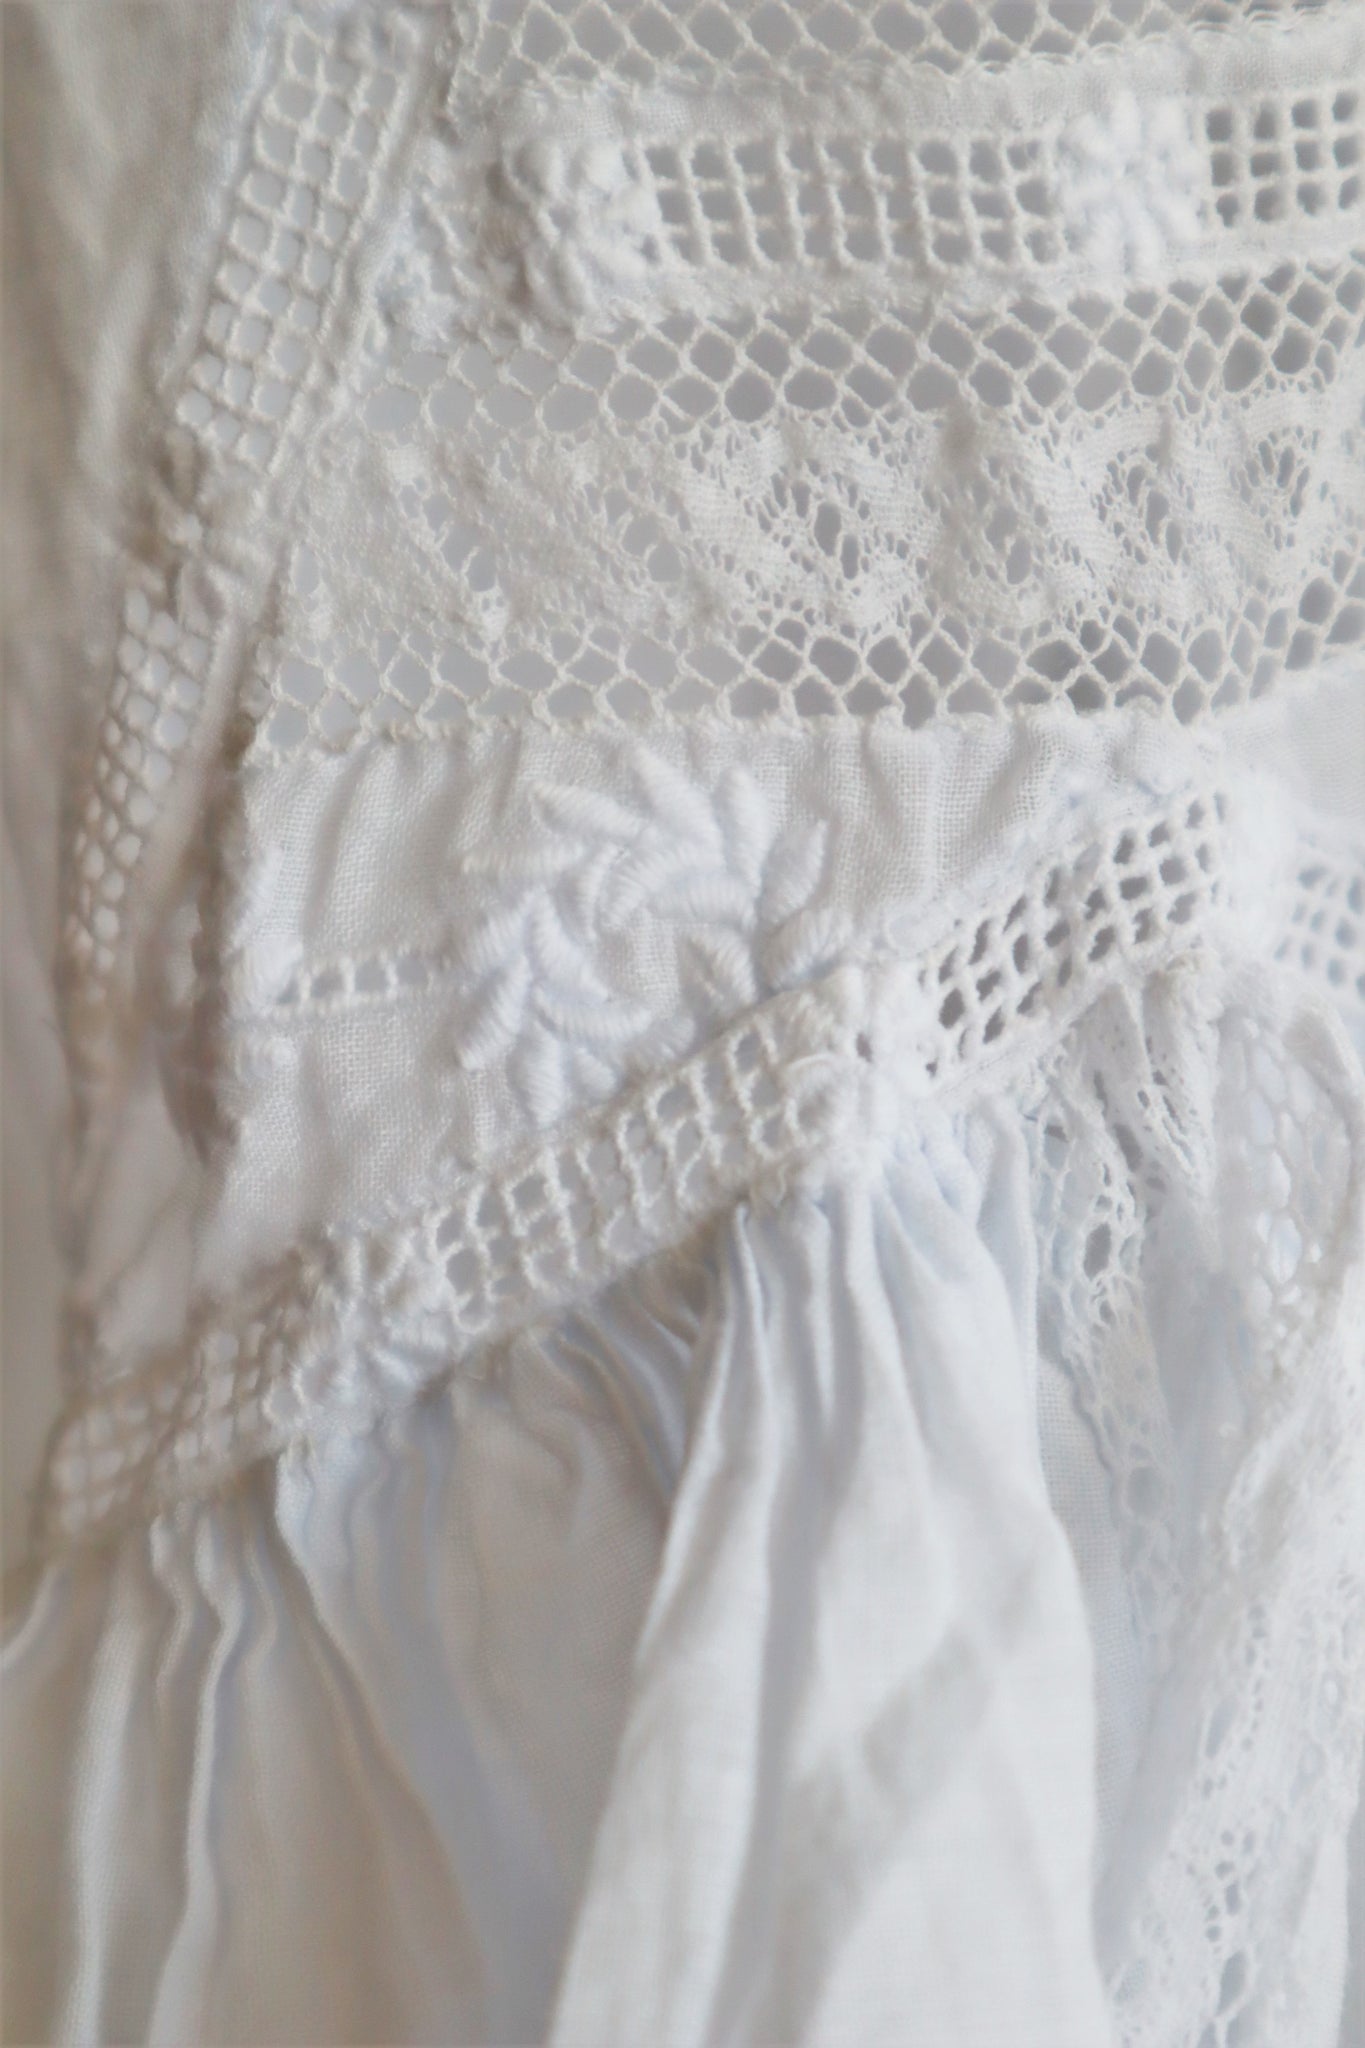 1900s Edwardian Embroidered White Cotton Romper